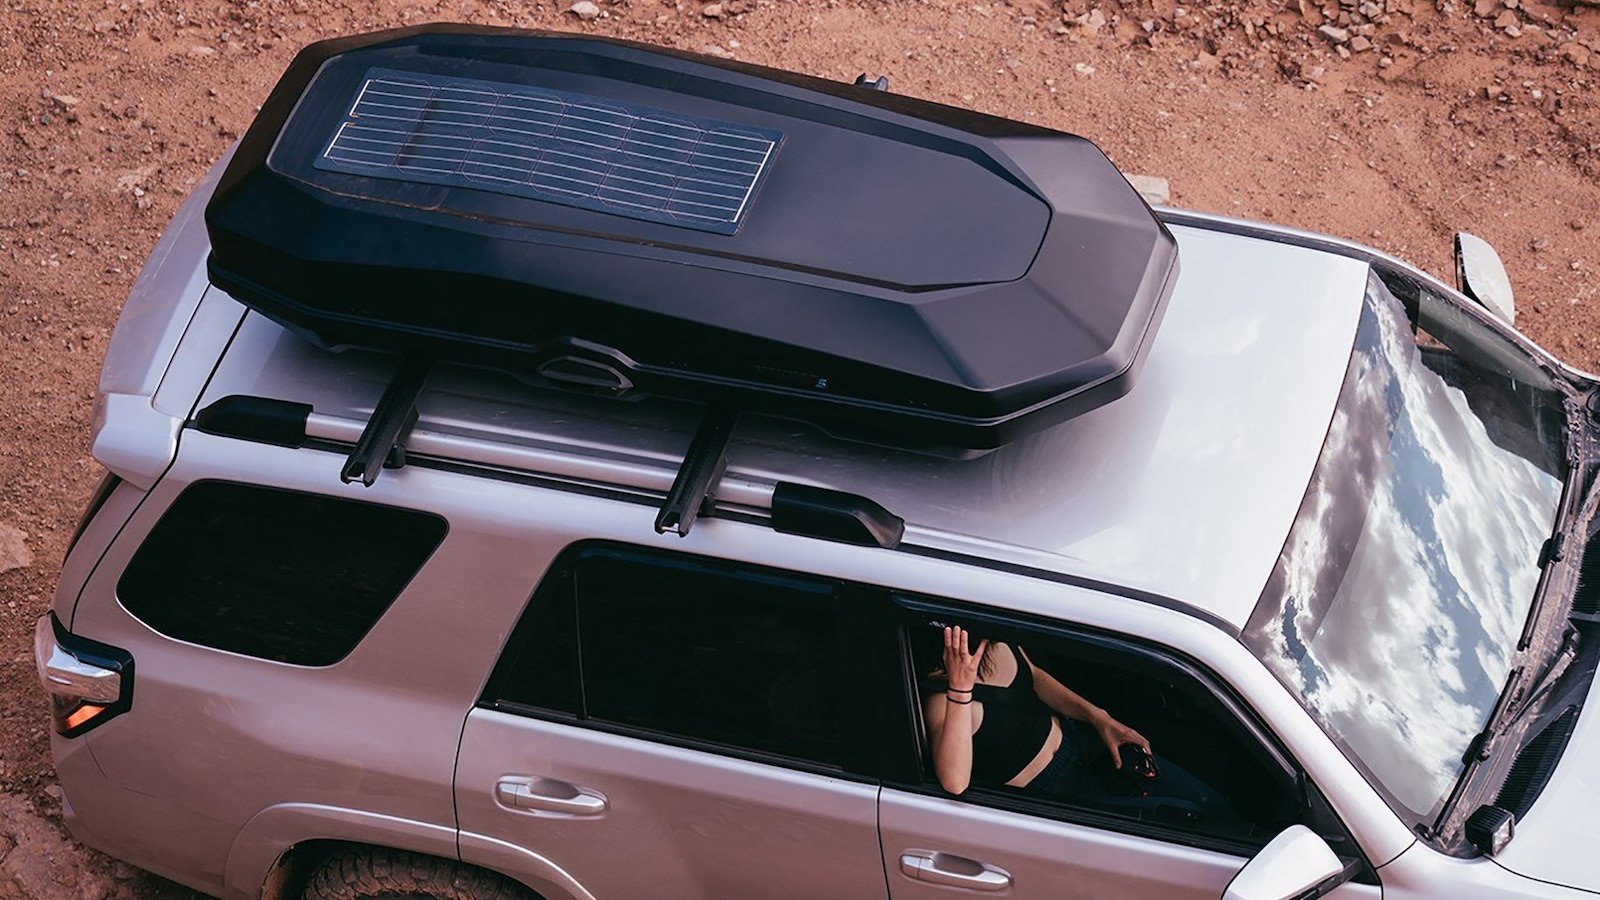 Yakima CBX Solar 16 Roof Box charges your electronics with its integrated solar panel